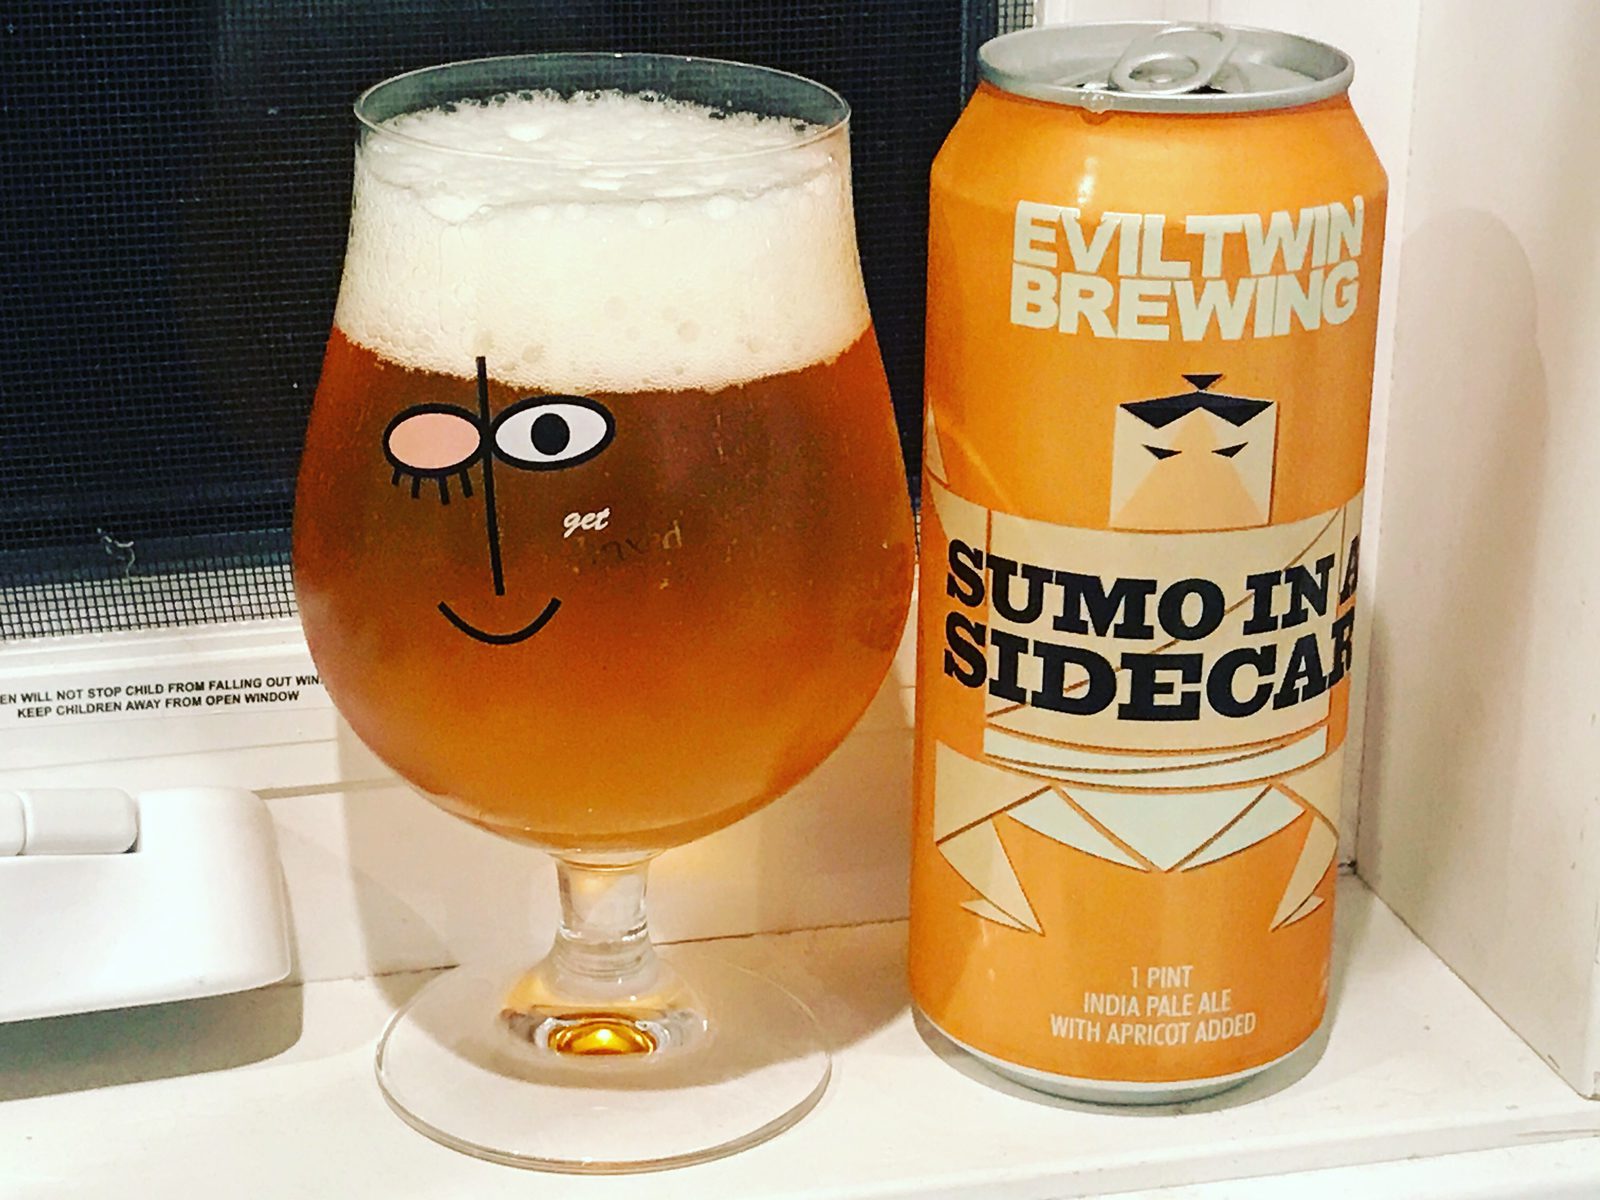 Evil Twin Brewing: Sumo In A Sidecar